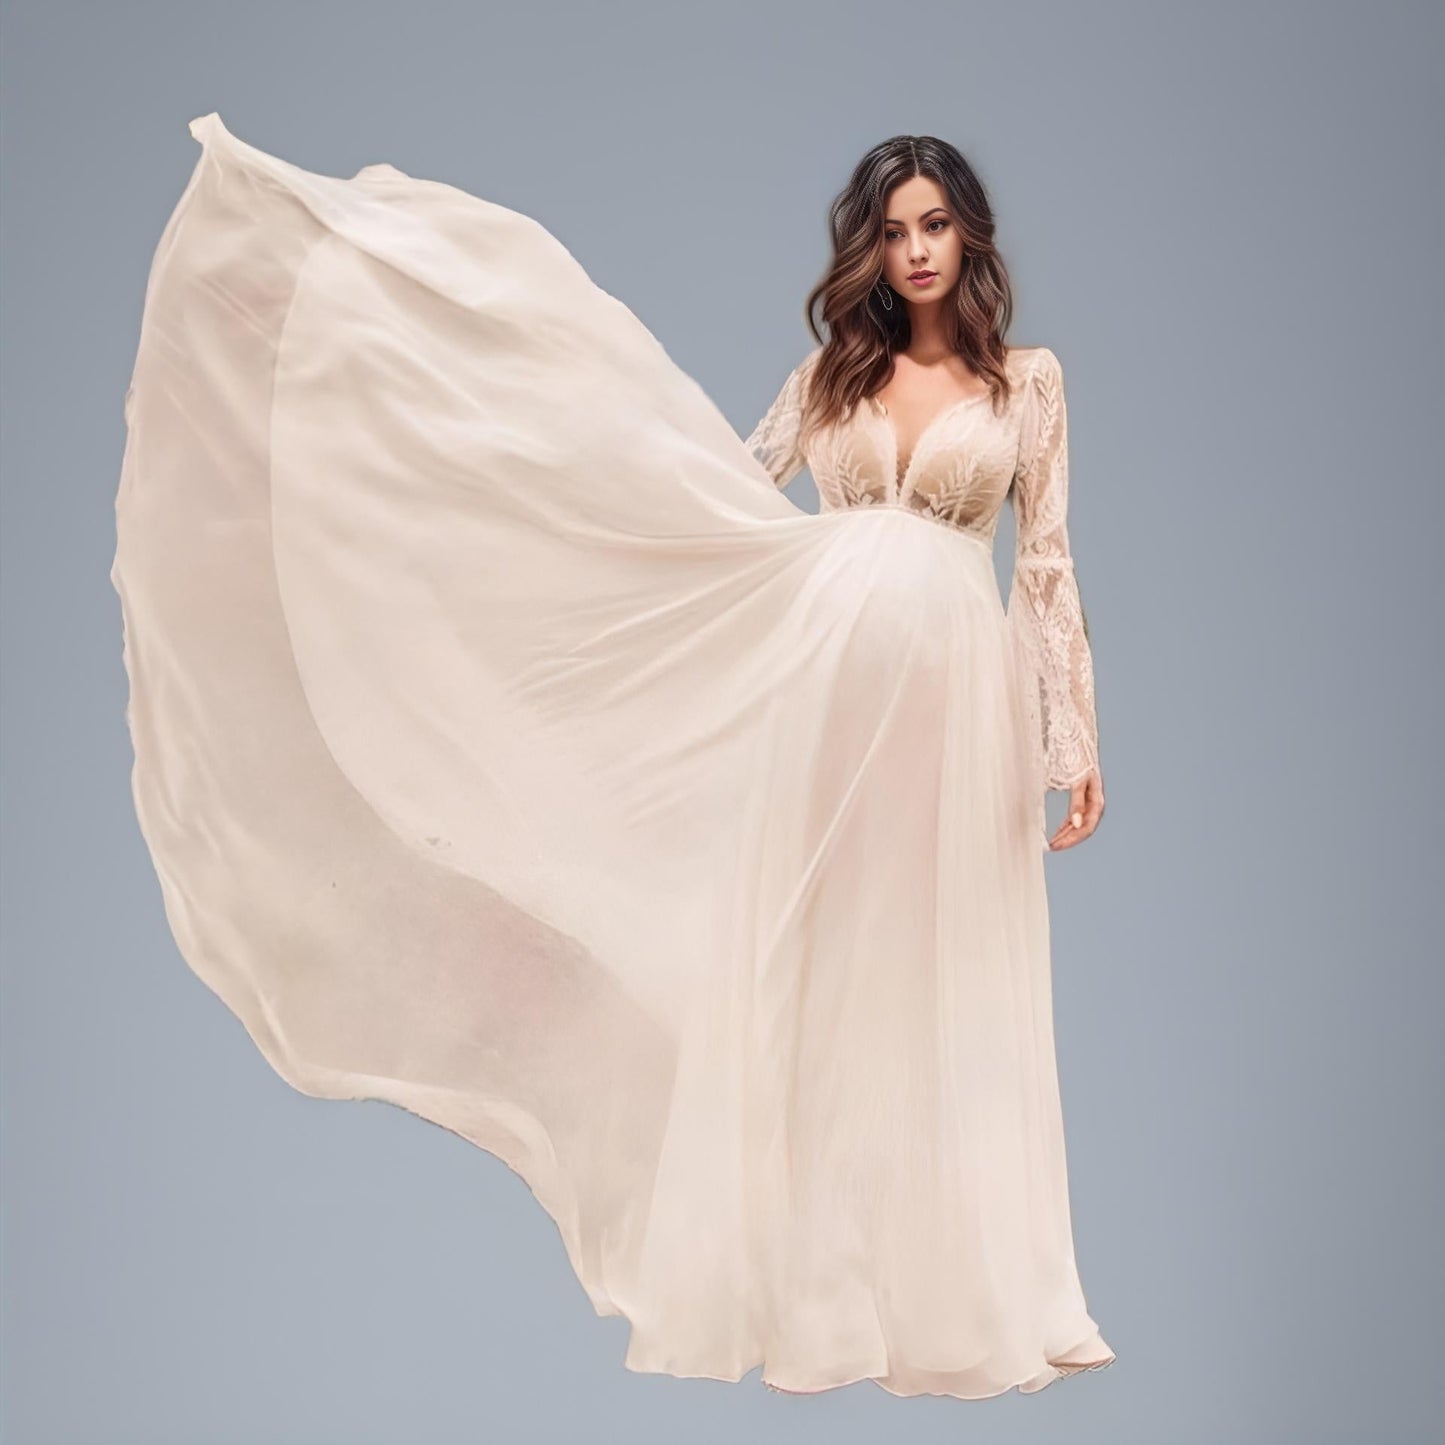 Bohemian Maternity Bridal Gown with Flowy Silhouette